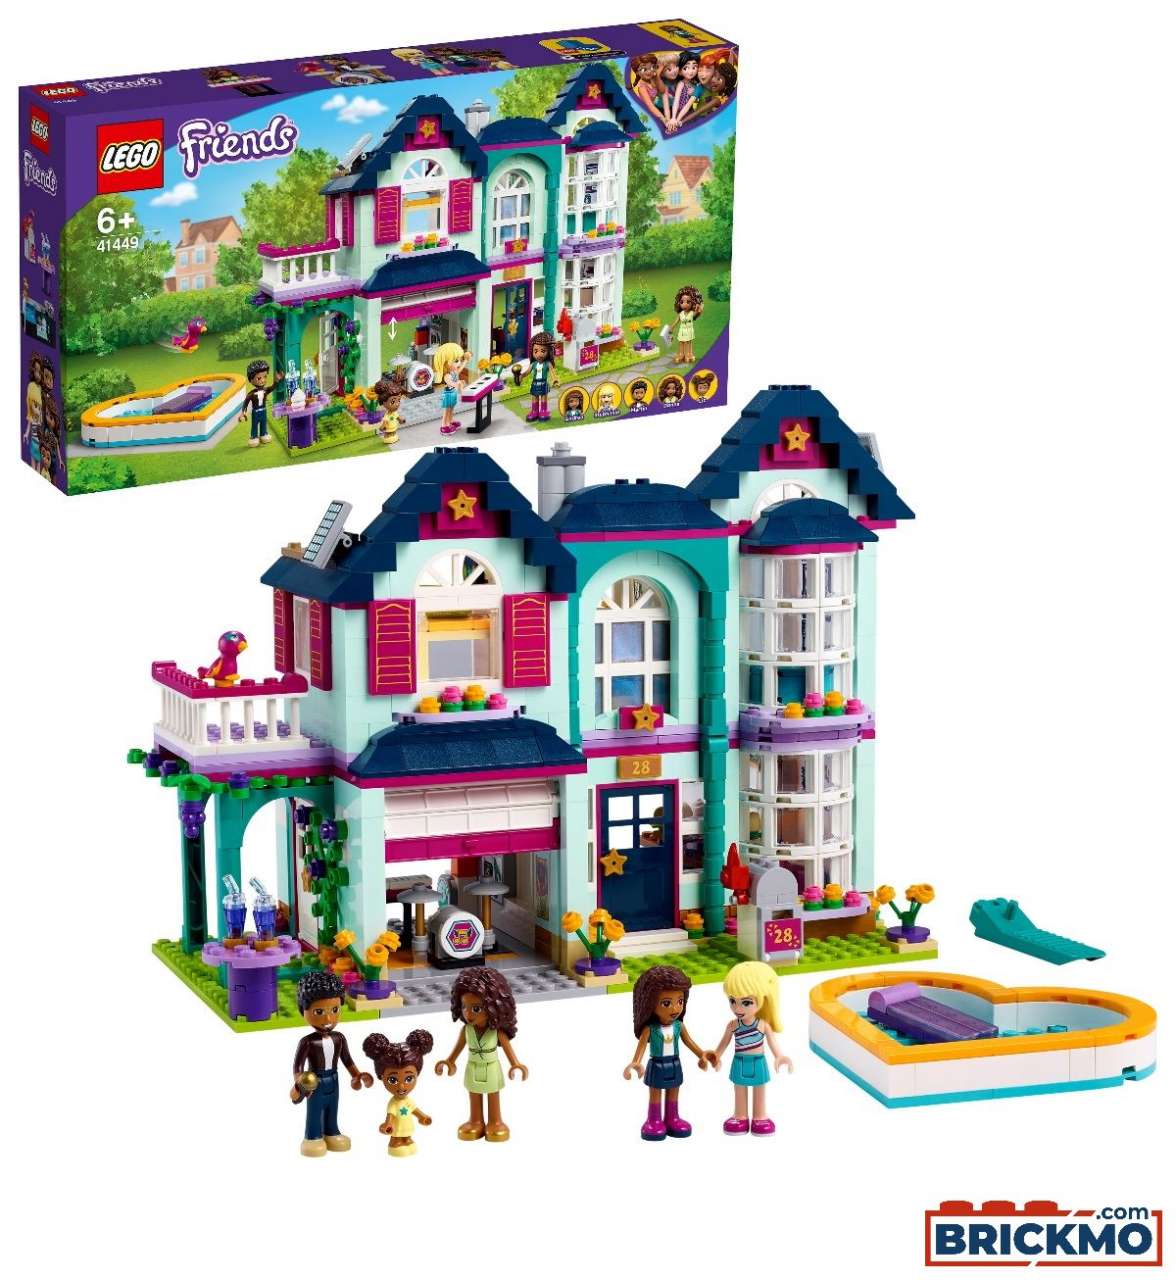 LEGO Friends 41449 Andreas Haus 41449